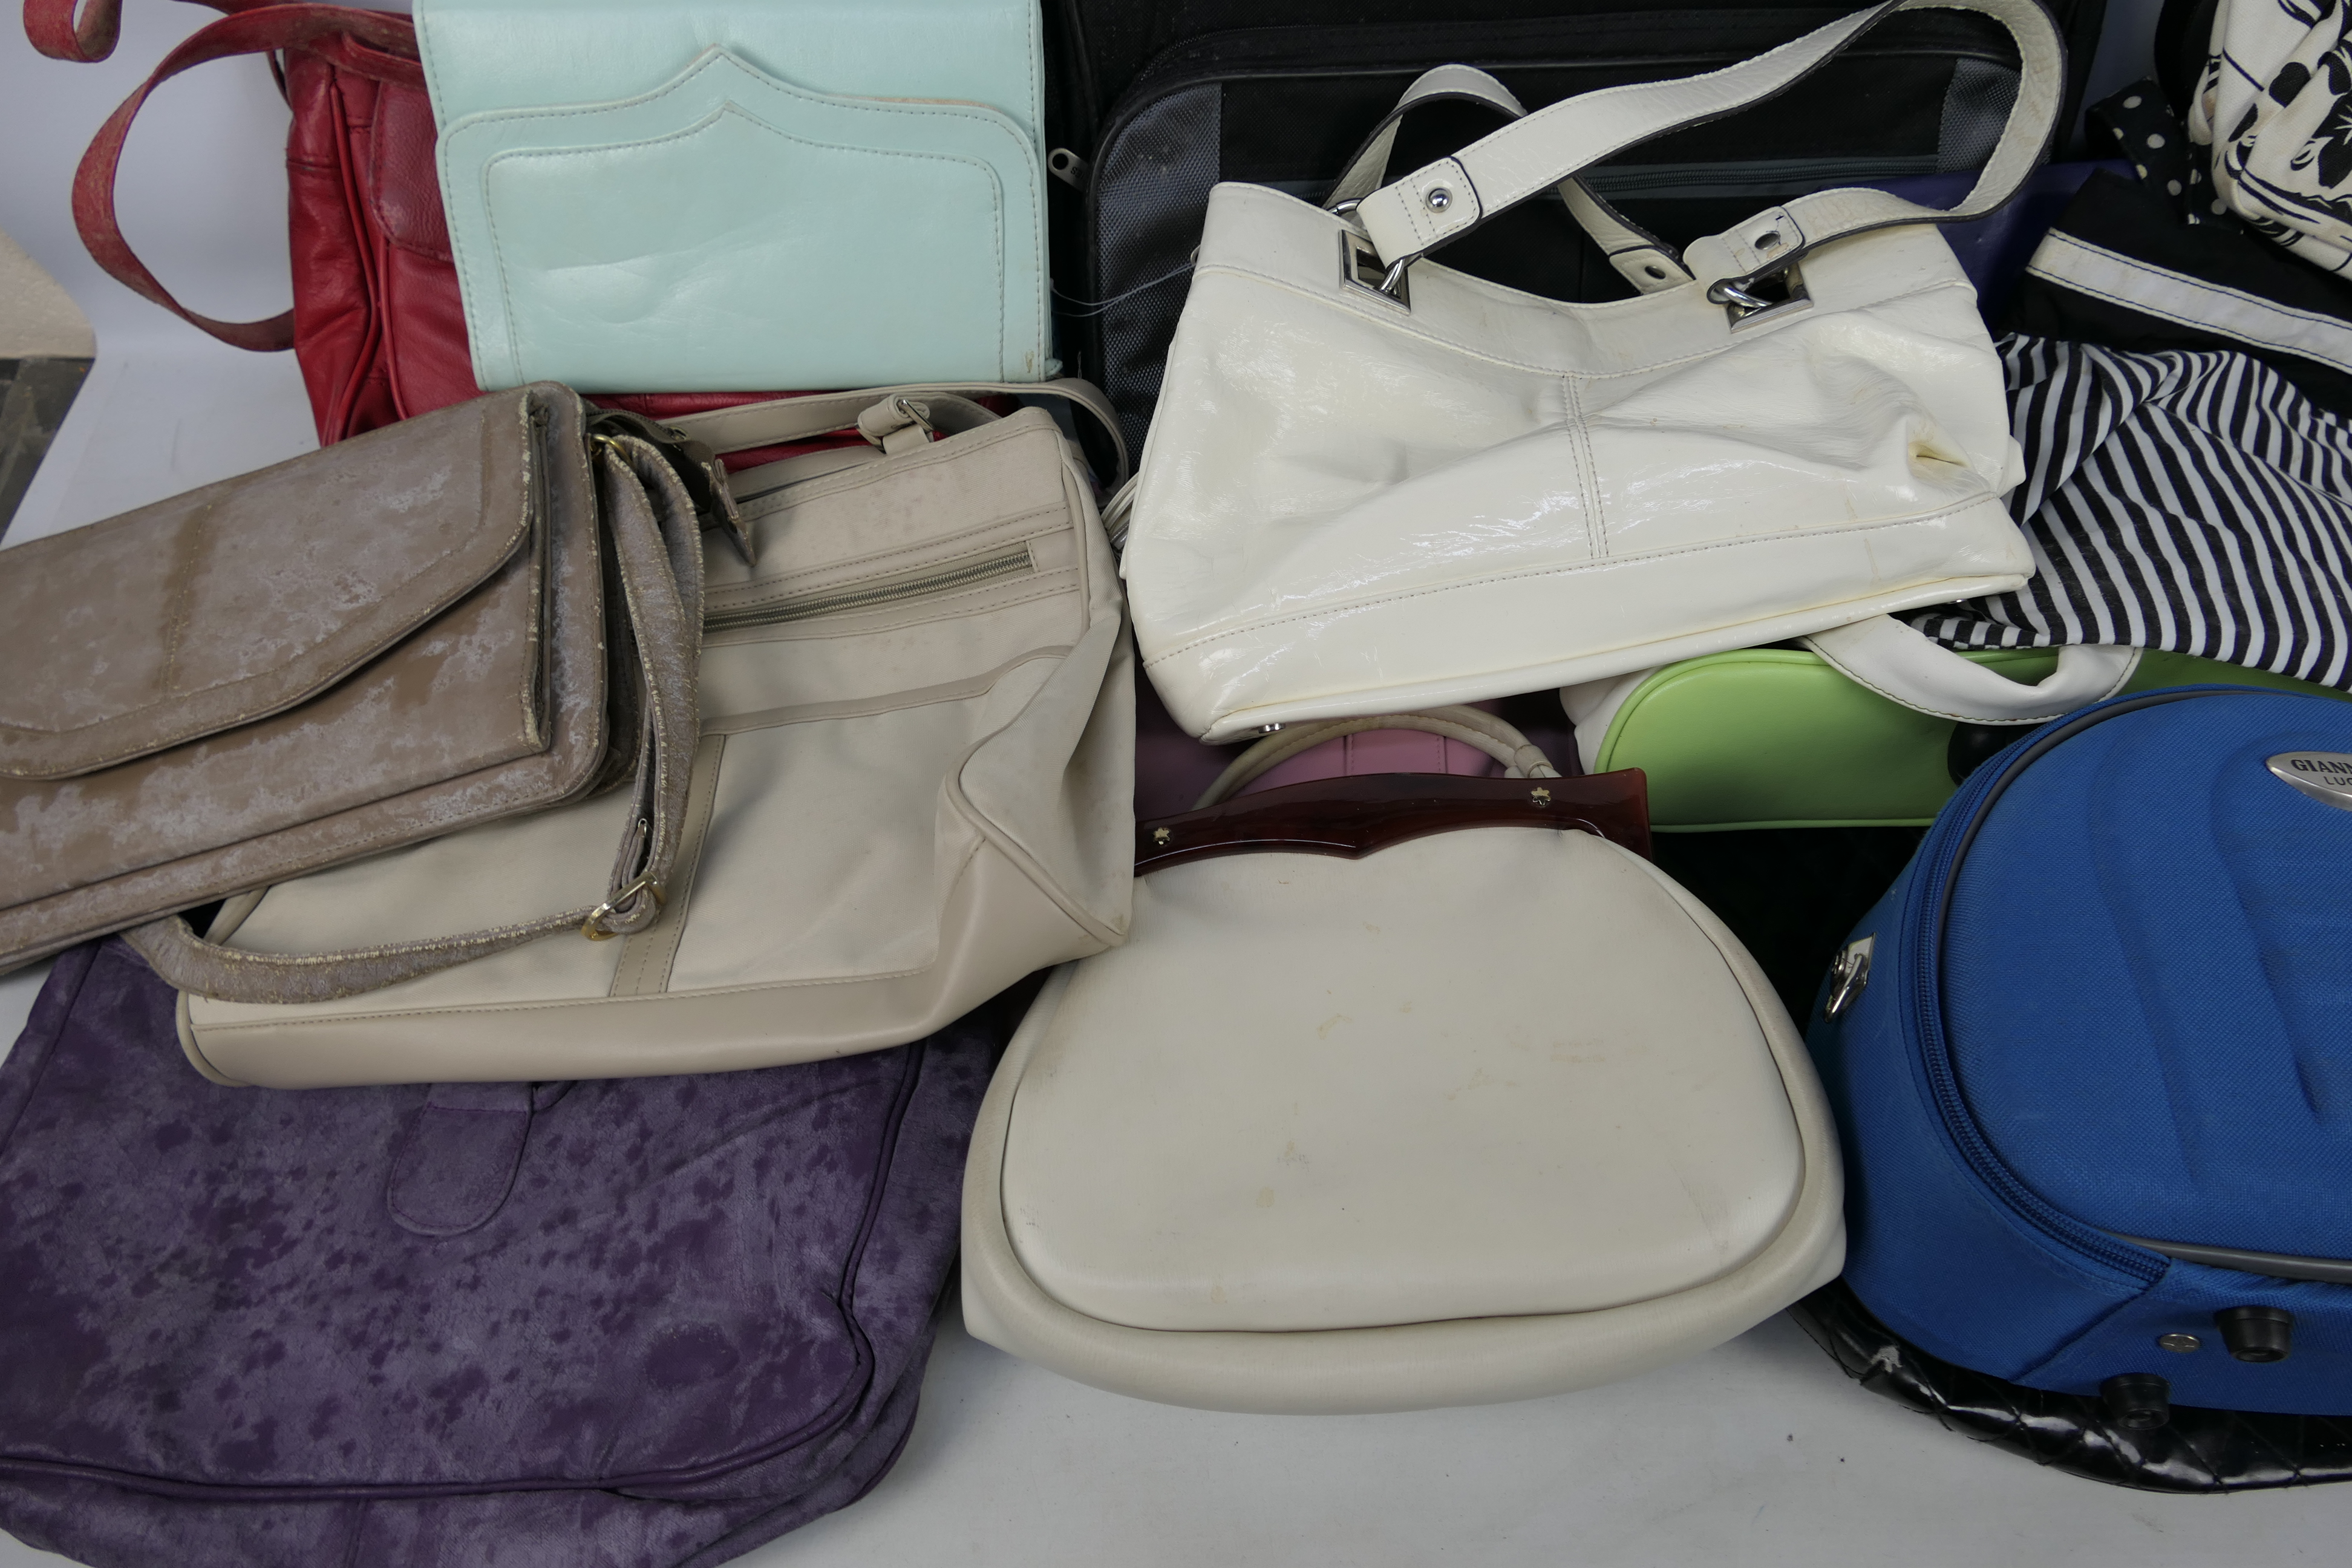 A collection of lady's handbags. - Image 2 of 3